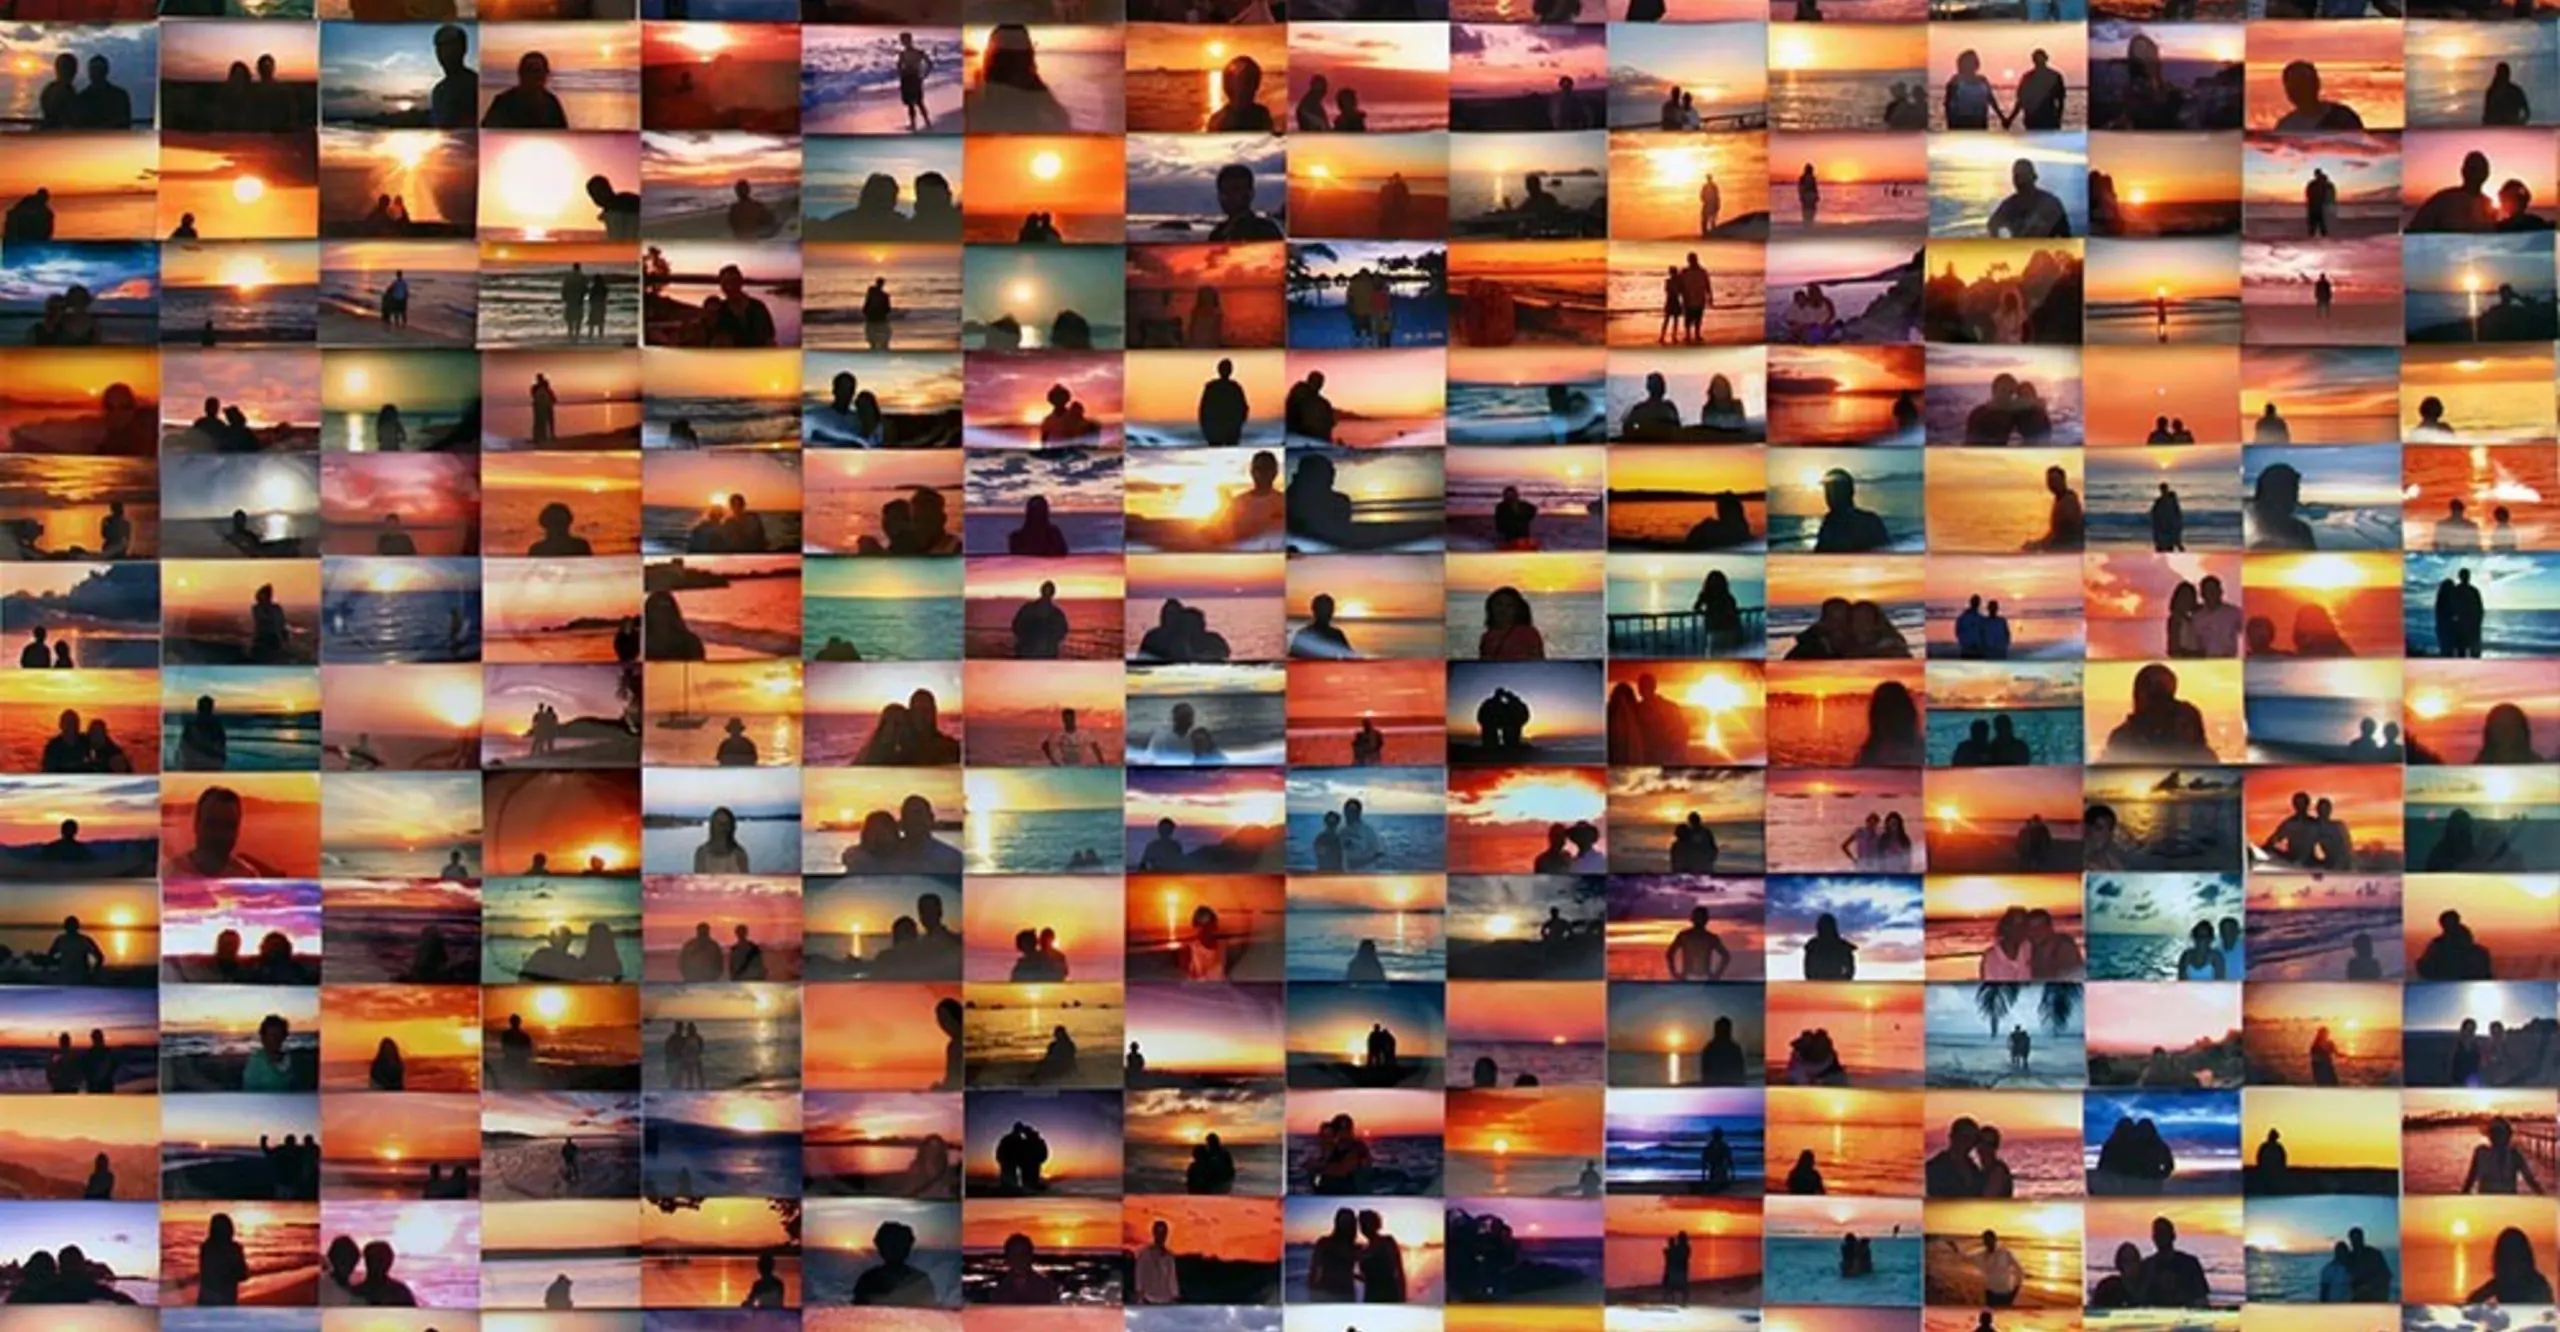 Sunset Portraits from Sunset Pictures on Flickr, 2010 - ongoing. Penelope Umbrico